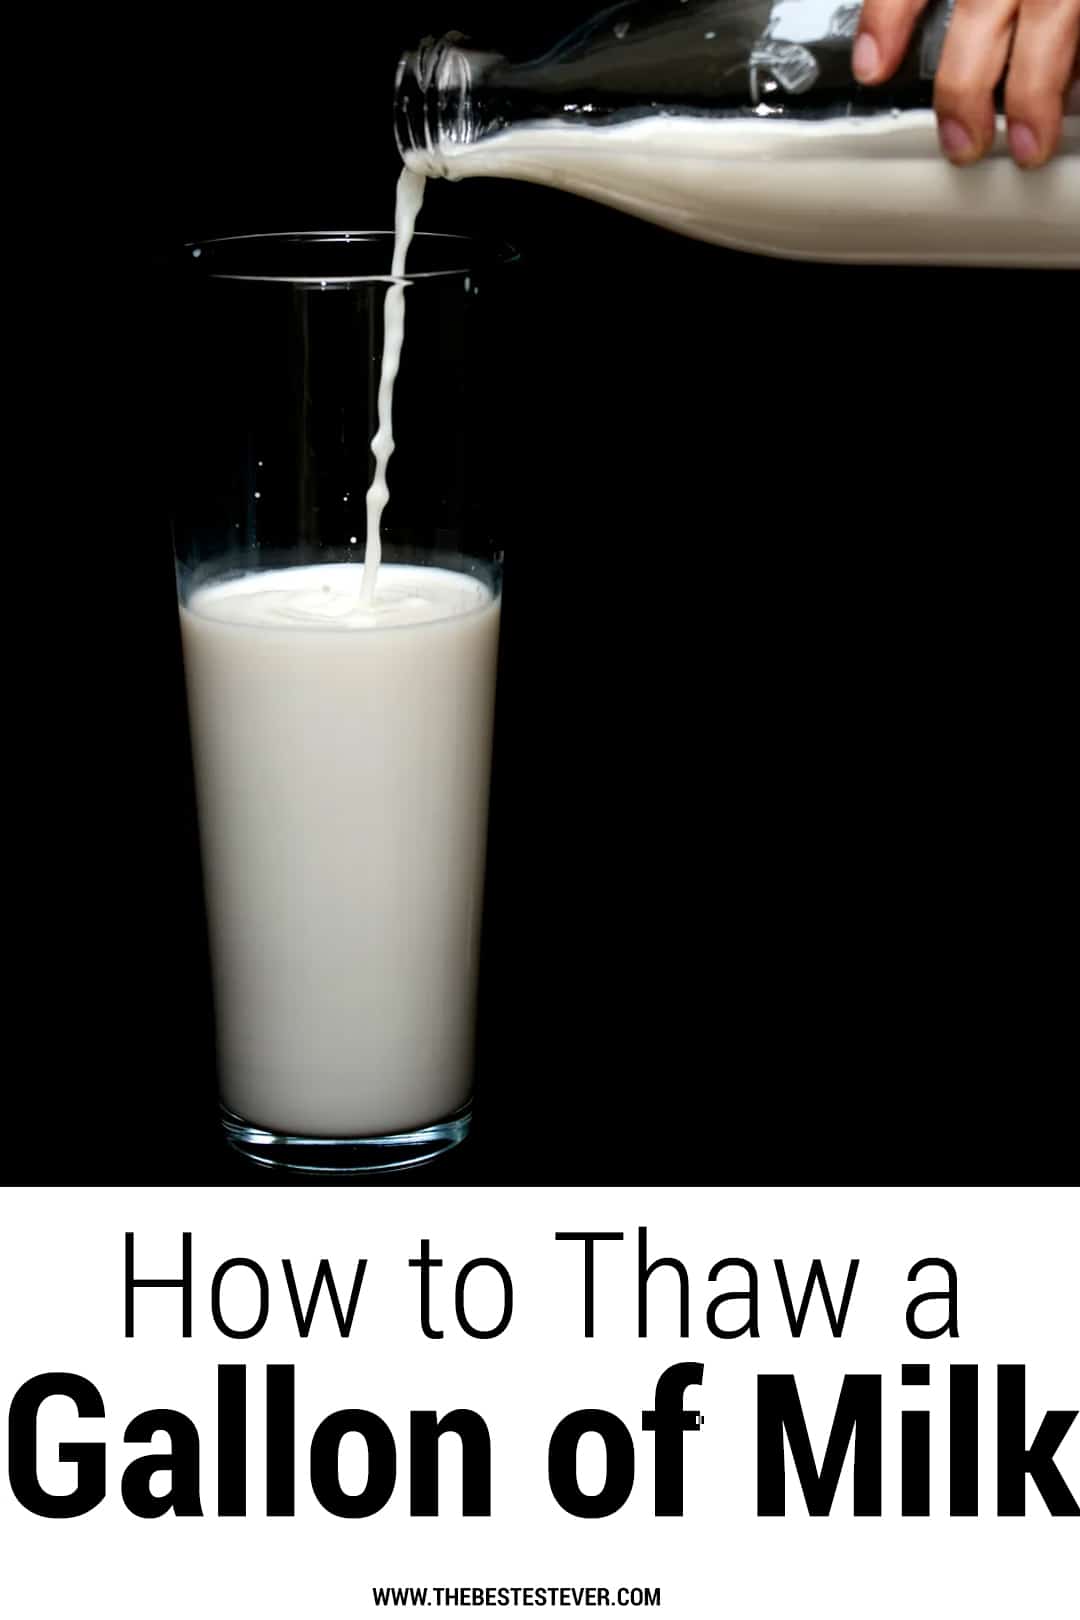 How to Thaw a Gallon of Milk: The Safest & Quickest Ways to Do It